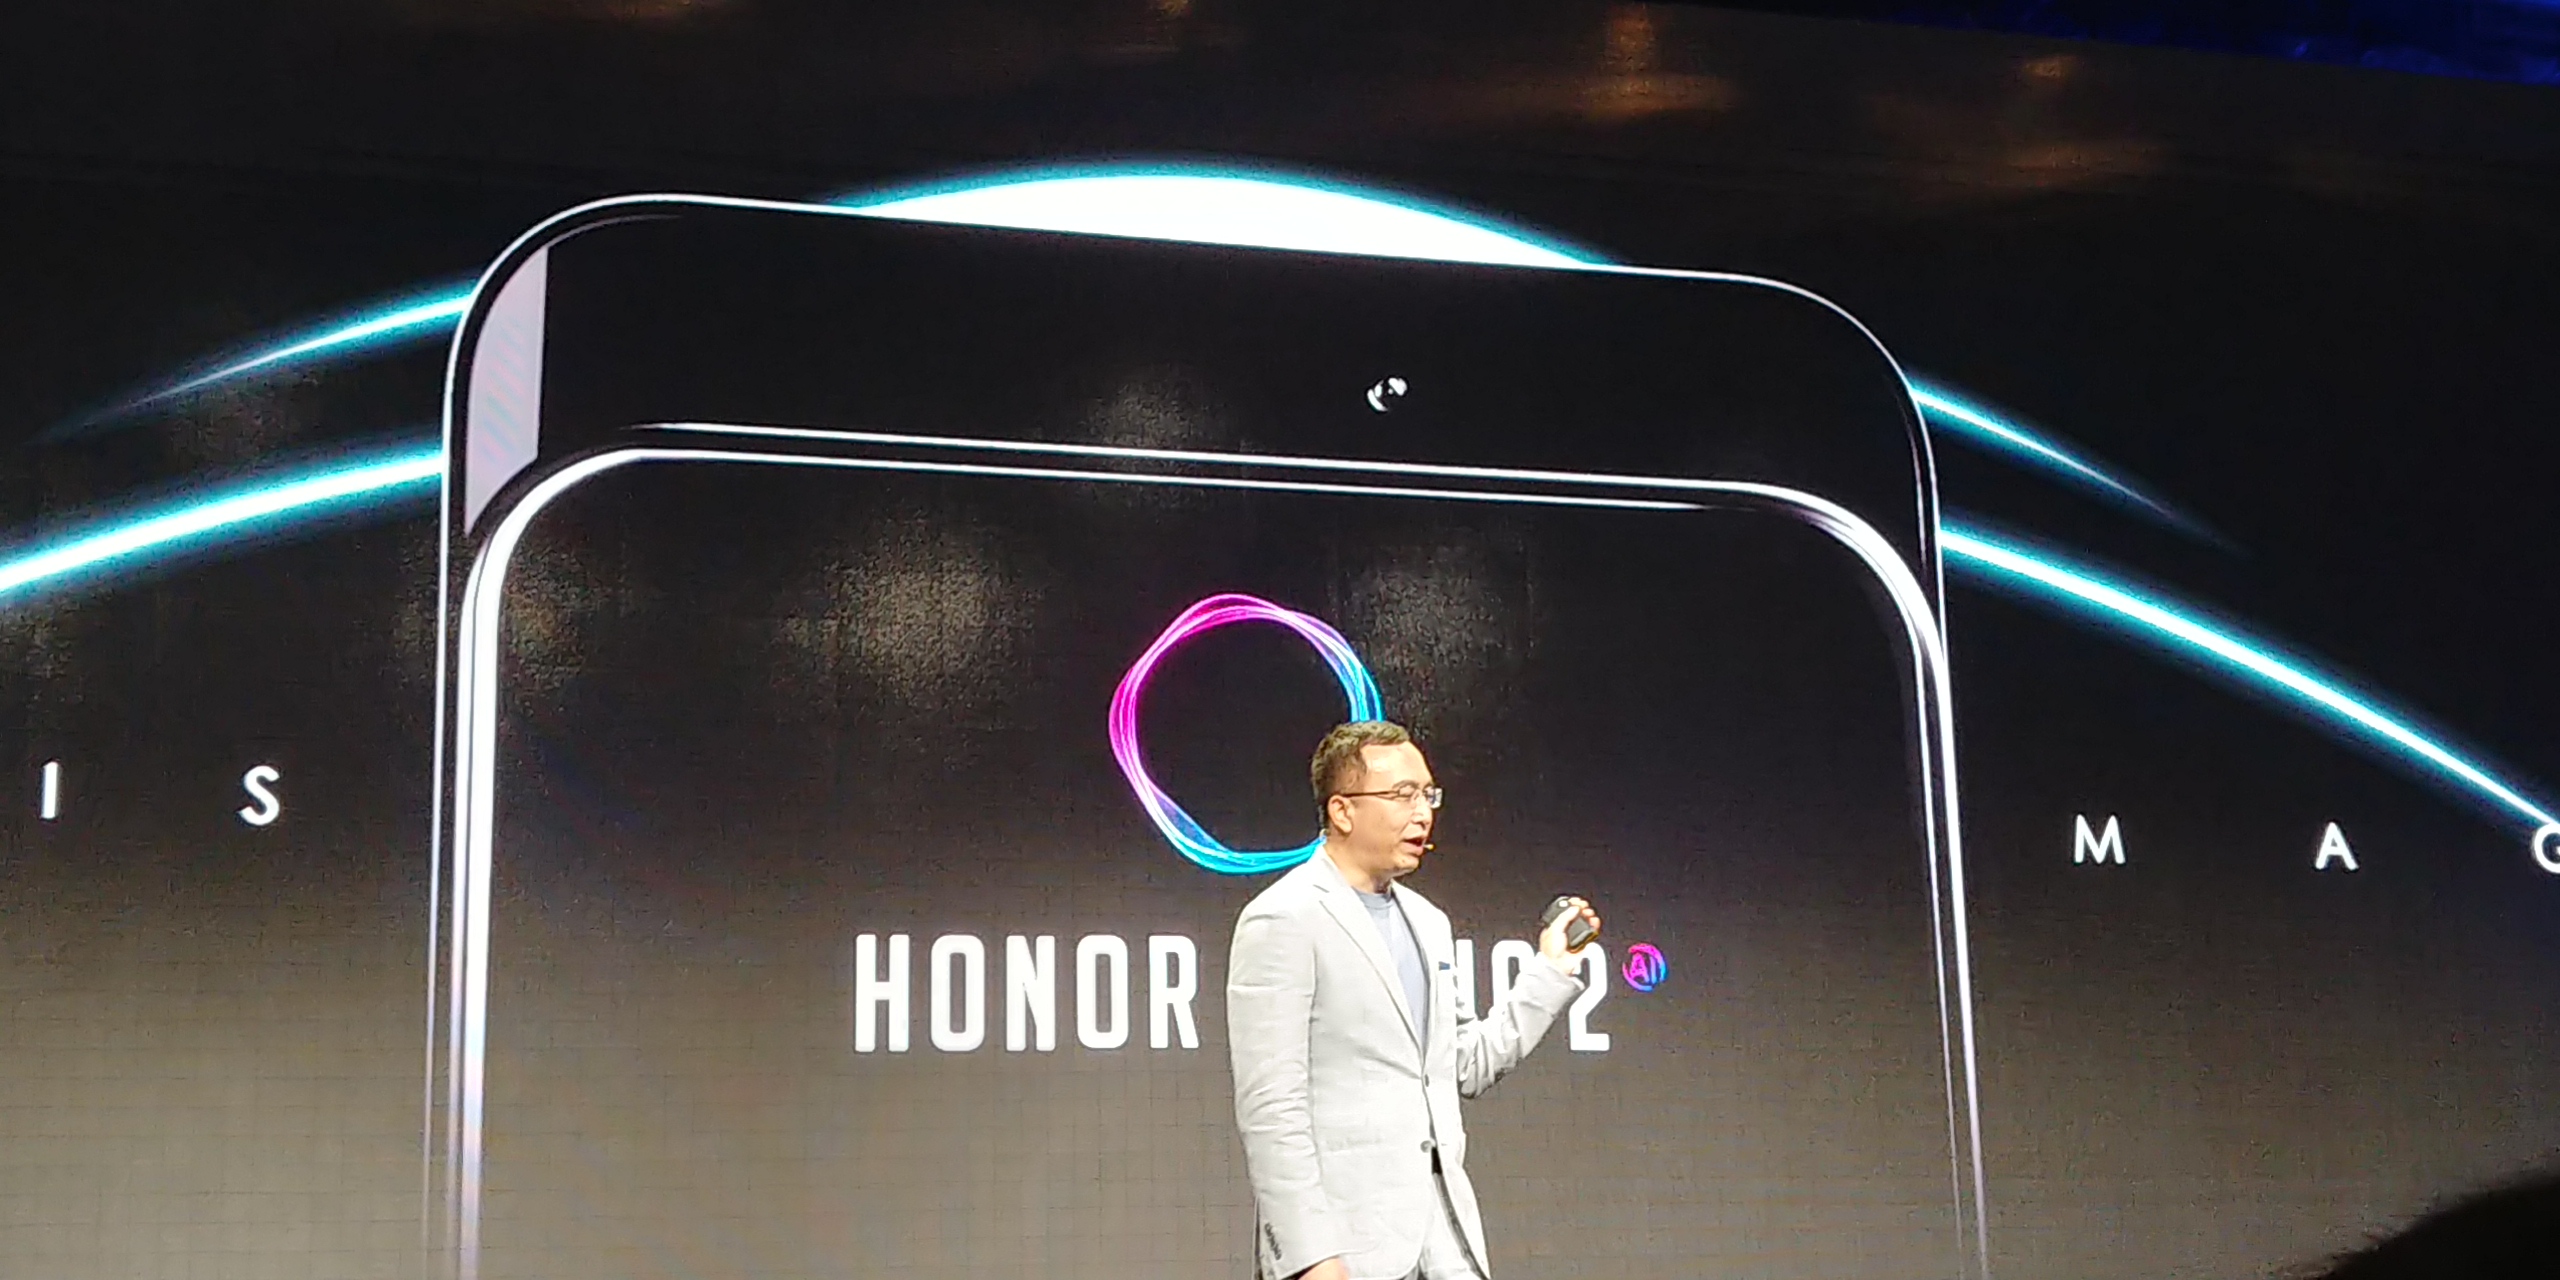 Honor Previews the Honor Magic 2: A No-Notch FullView Smartphone with